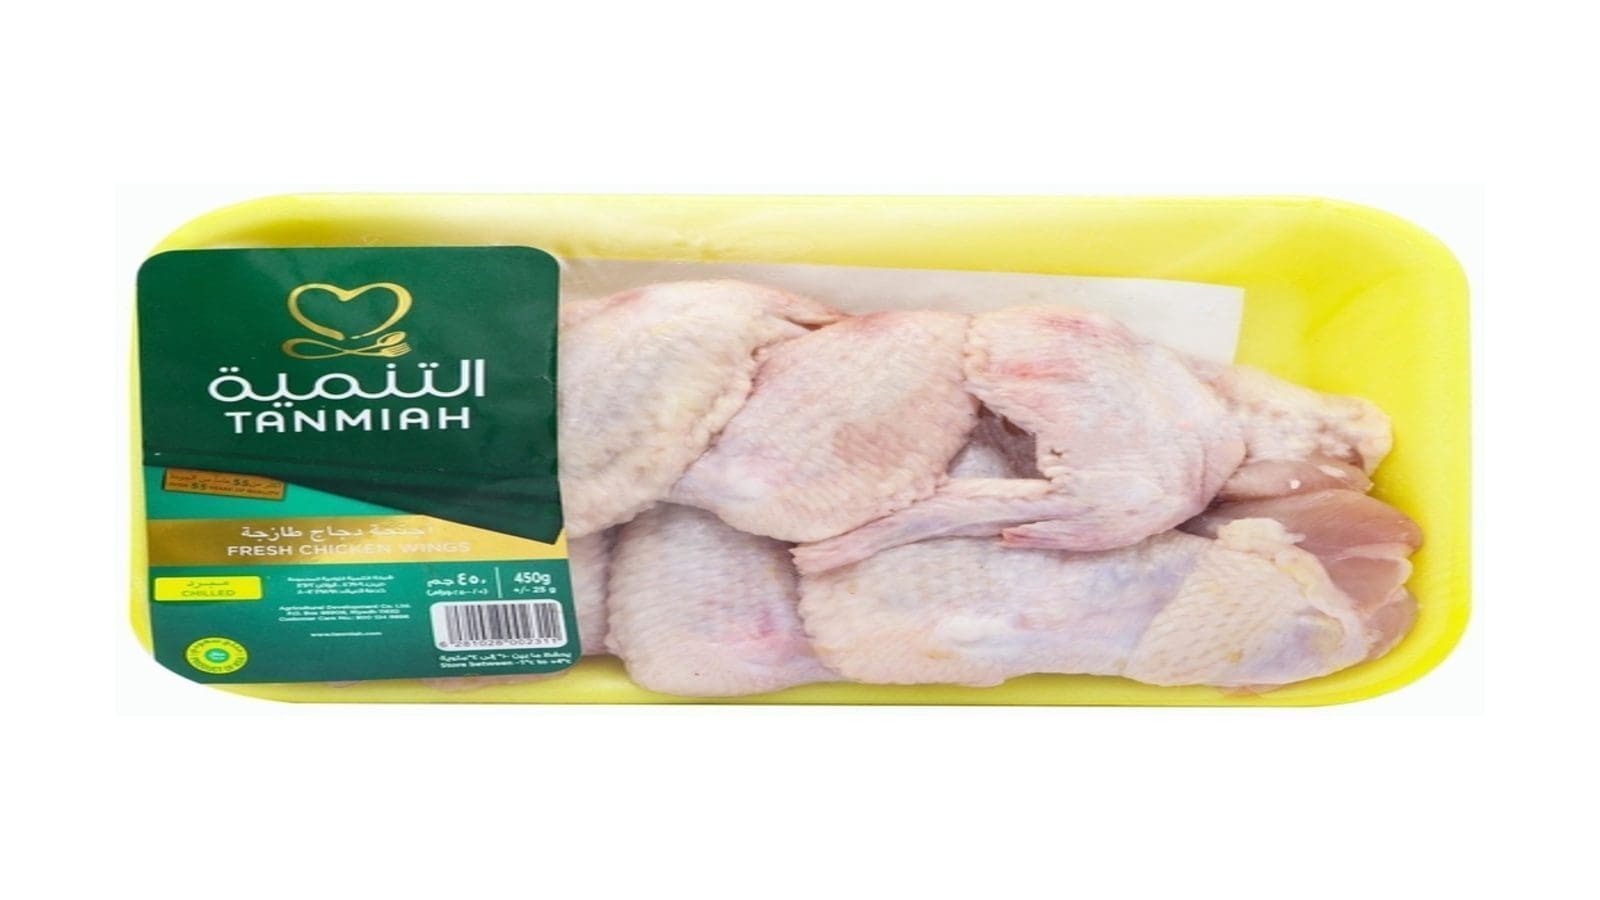 Tanmiah net profit jumps 1277% in 2022 buoyed by strategic partnership with meat giant Tyson foods